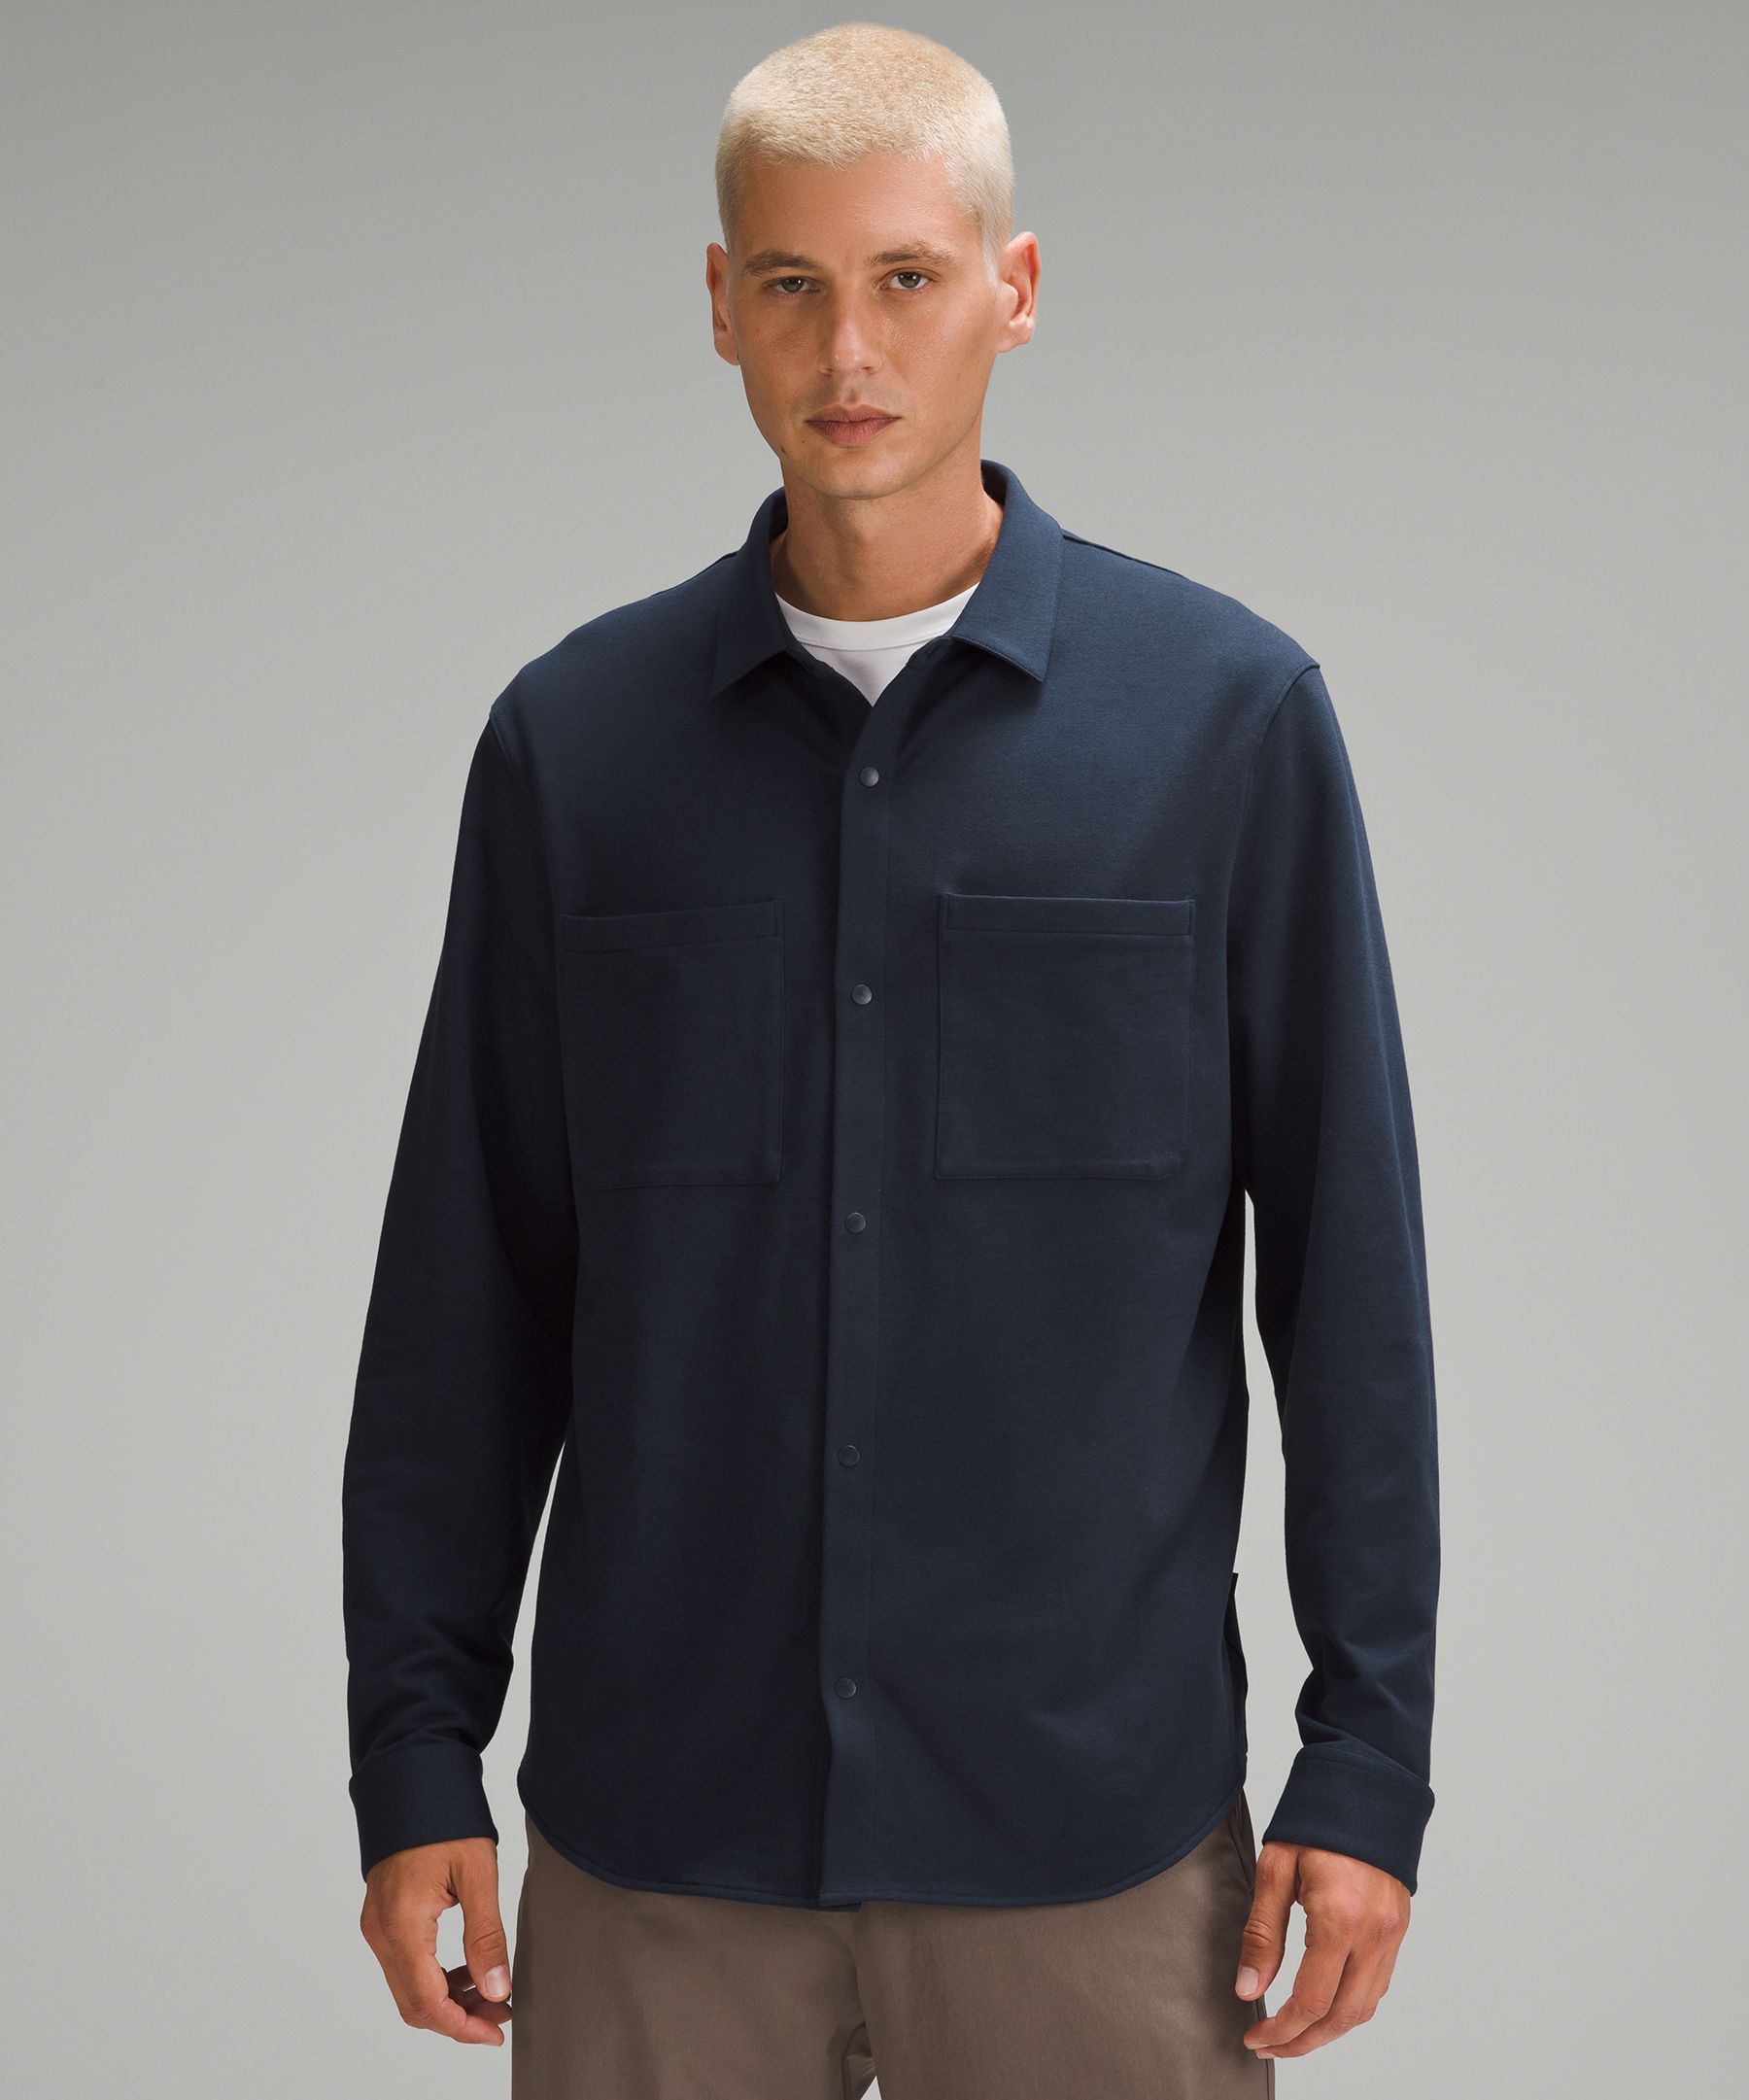 FRENCH TERRY UTILITY SHIRT